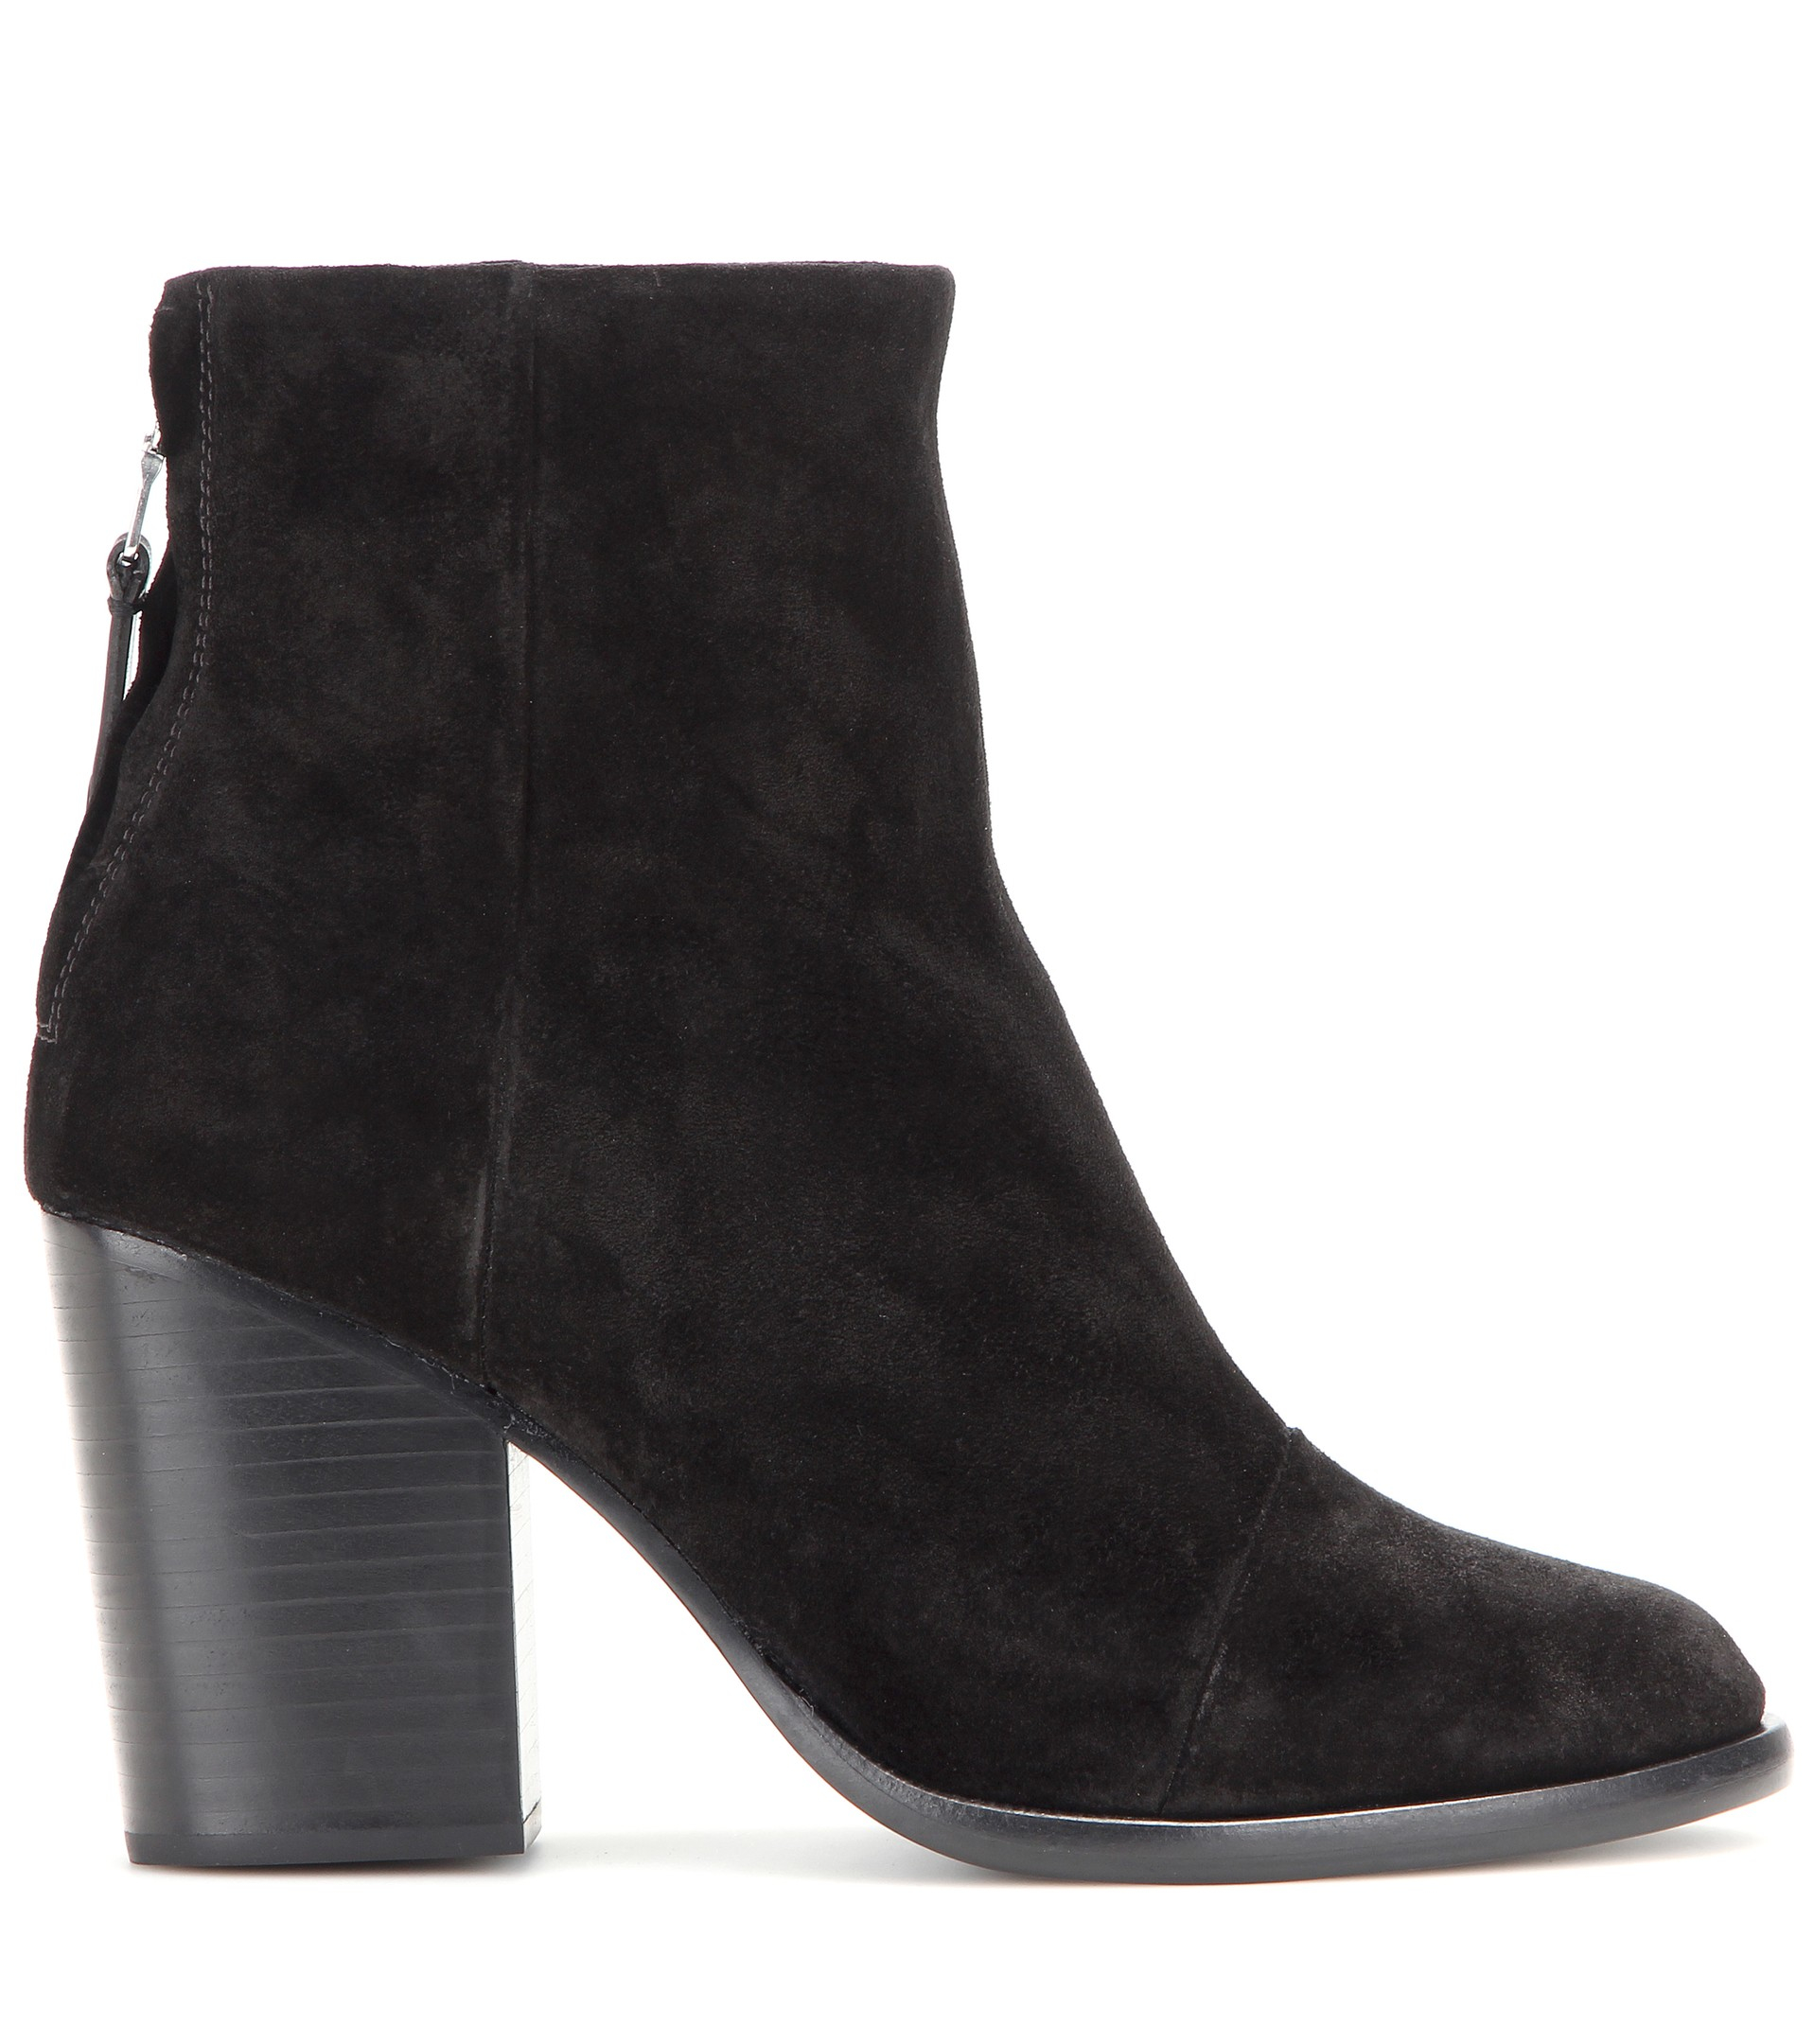 Lyst - Rag & bone Ashby Suede Ankle Boots in Black